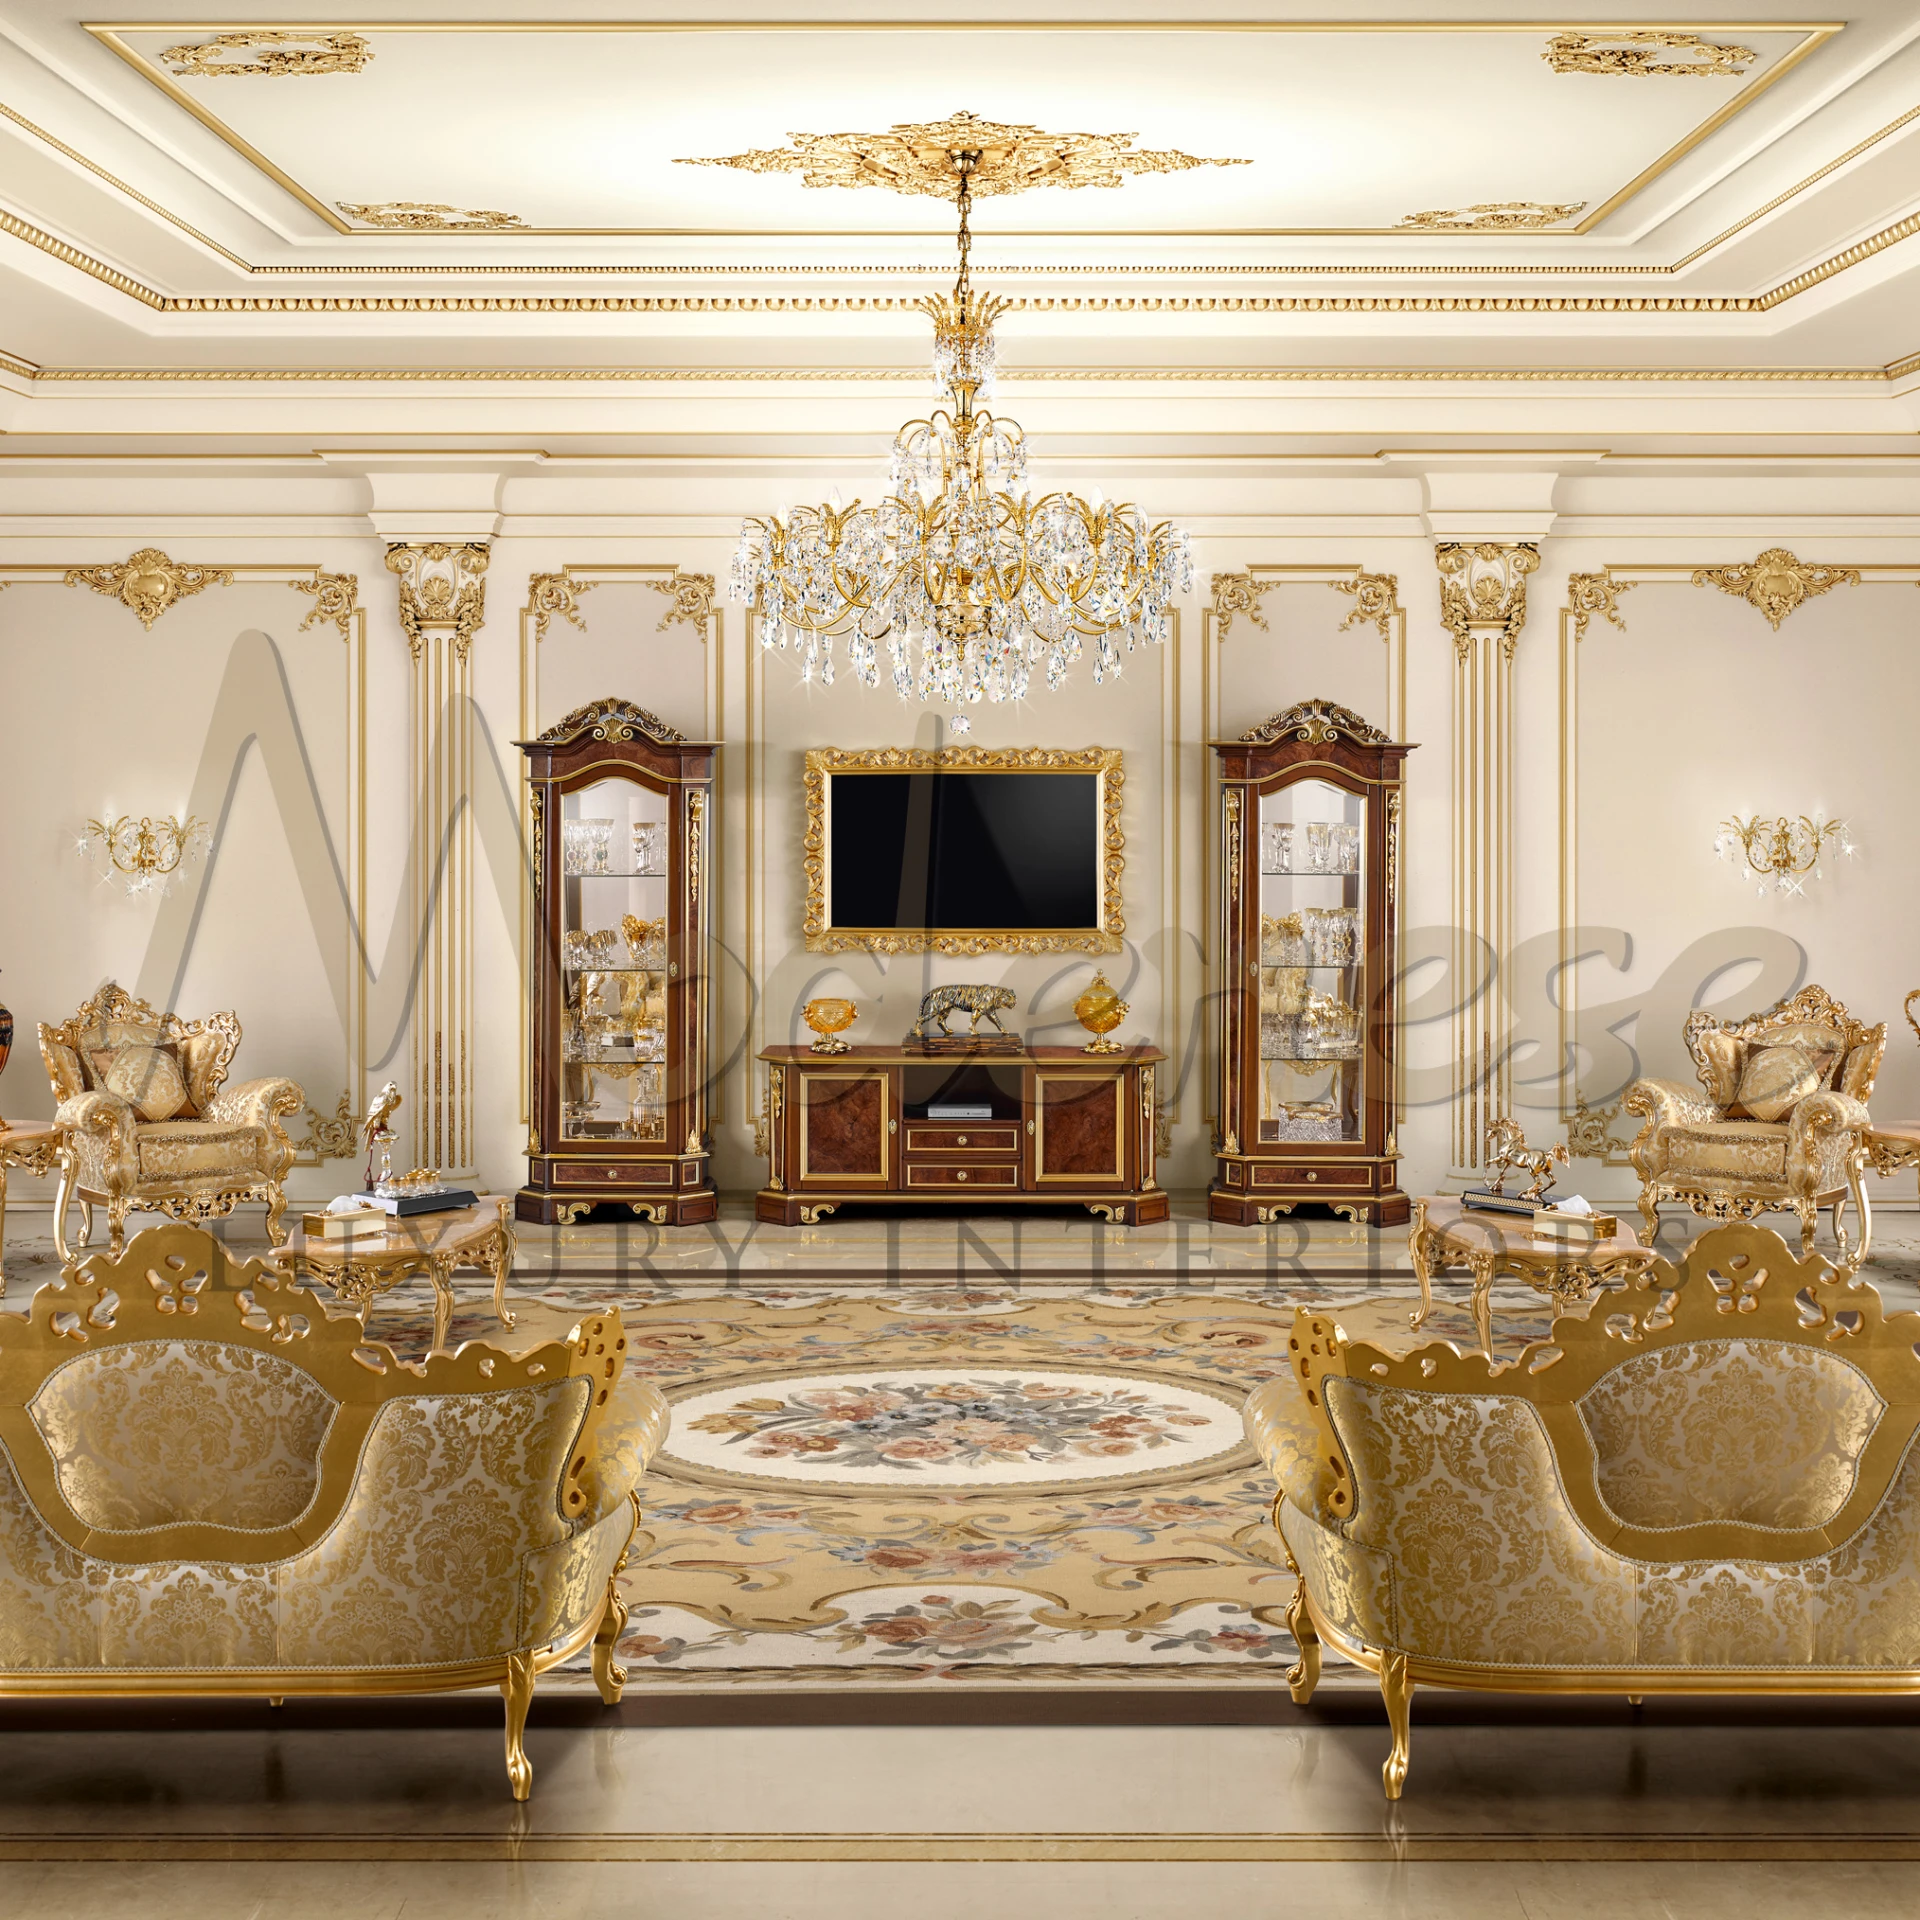 A luxurious room with shiny gold furniture, cabinets, sideboard and a big fancy light.